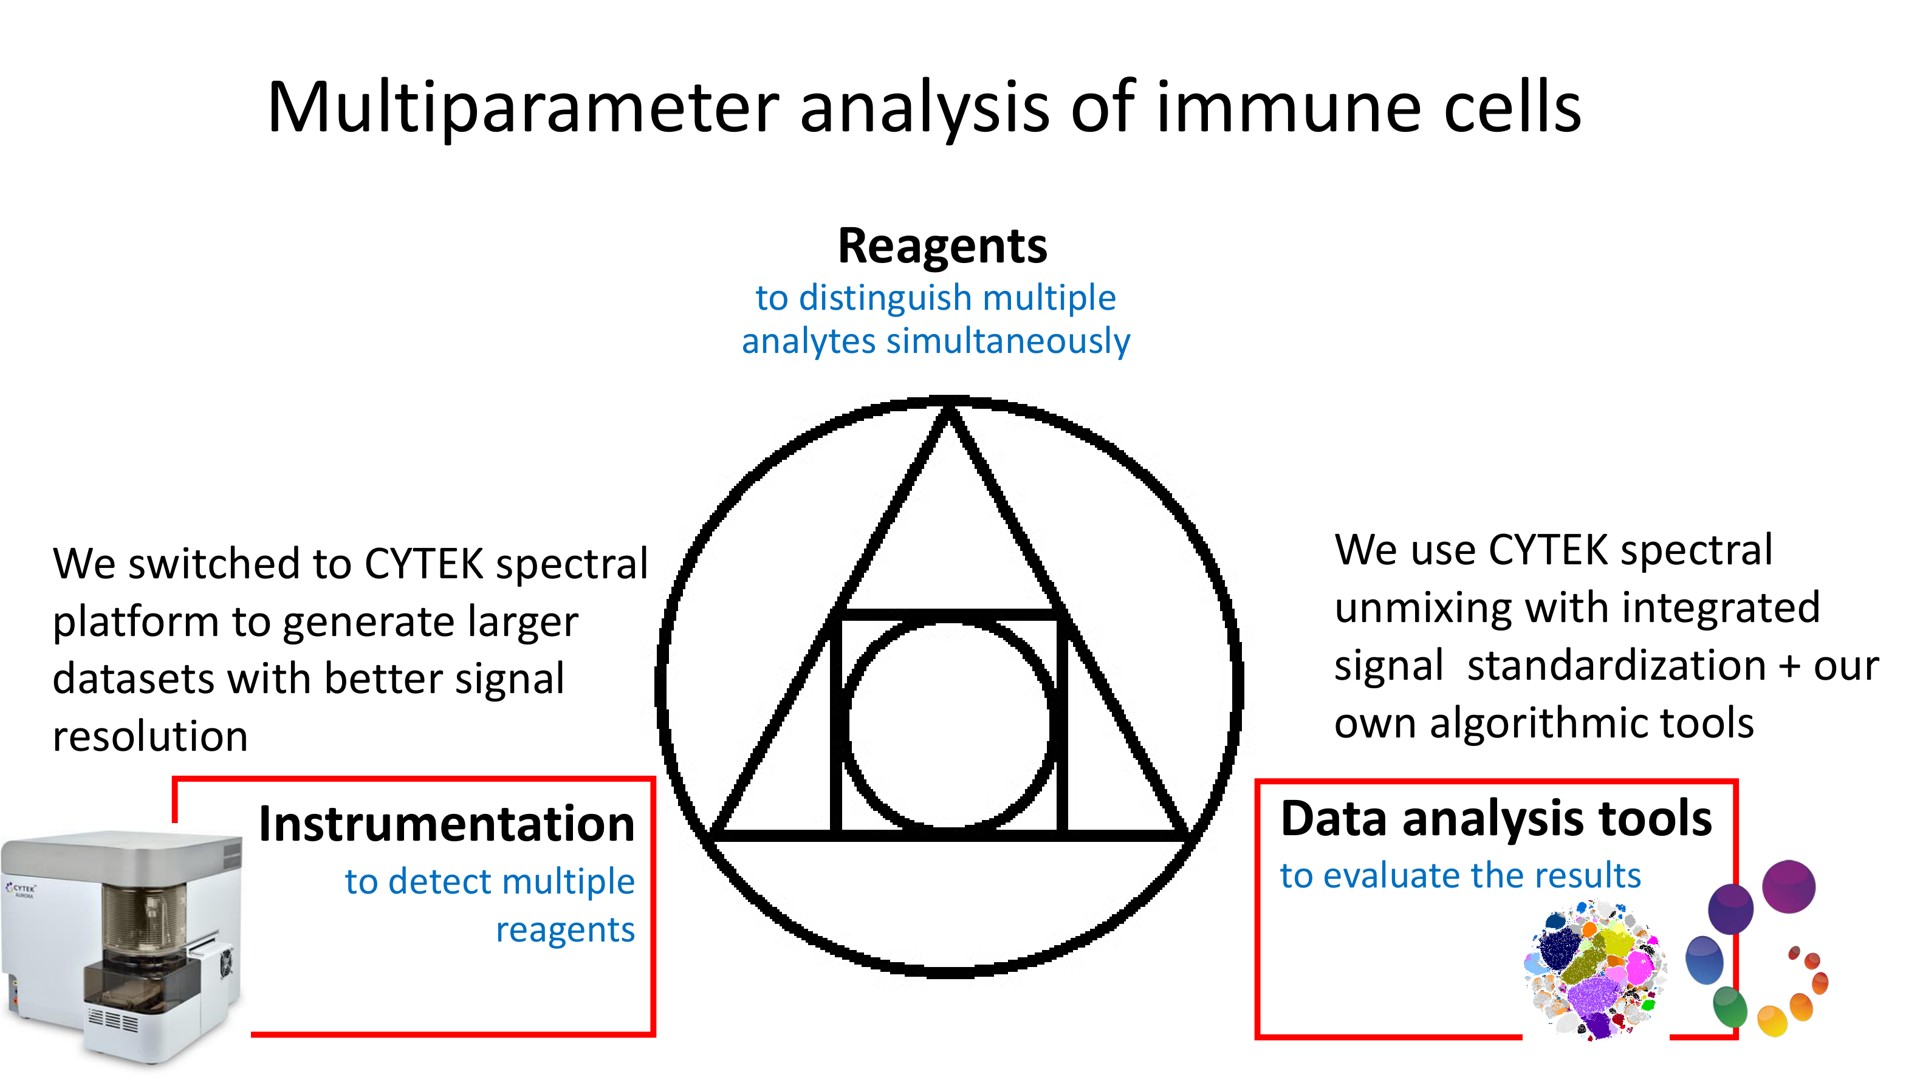 analysis of immune cells reagents instrumentation data analysis tools we switched to spectral platform to generate resolution we use spectral with integrated own algorithmic | Cytek